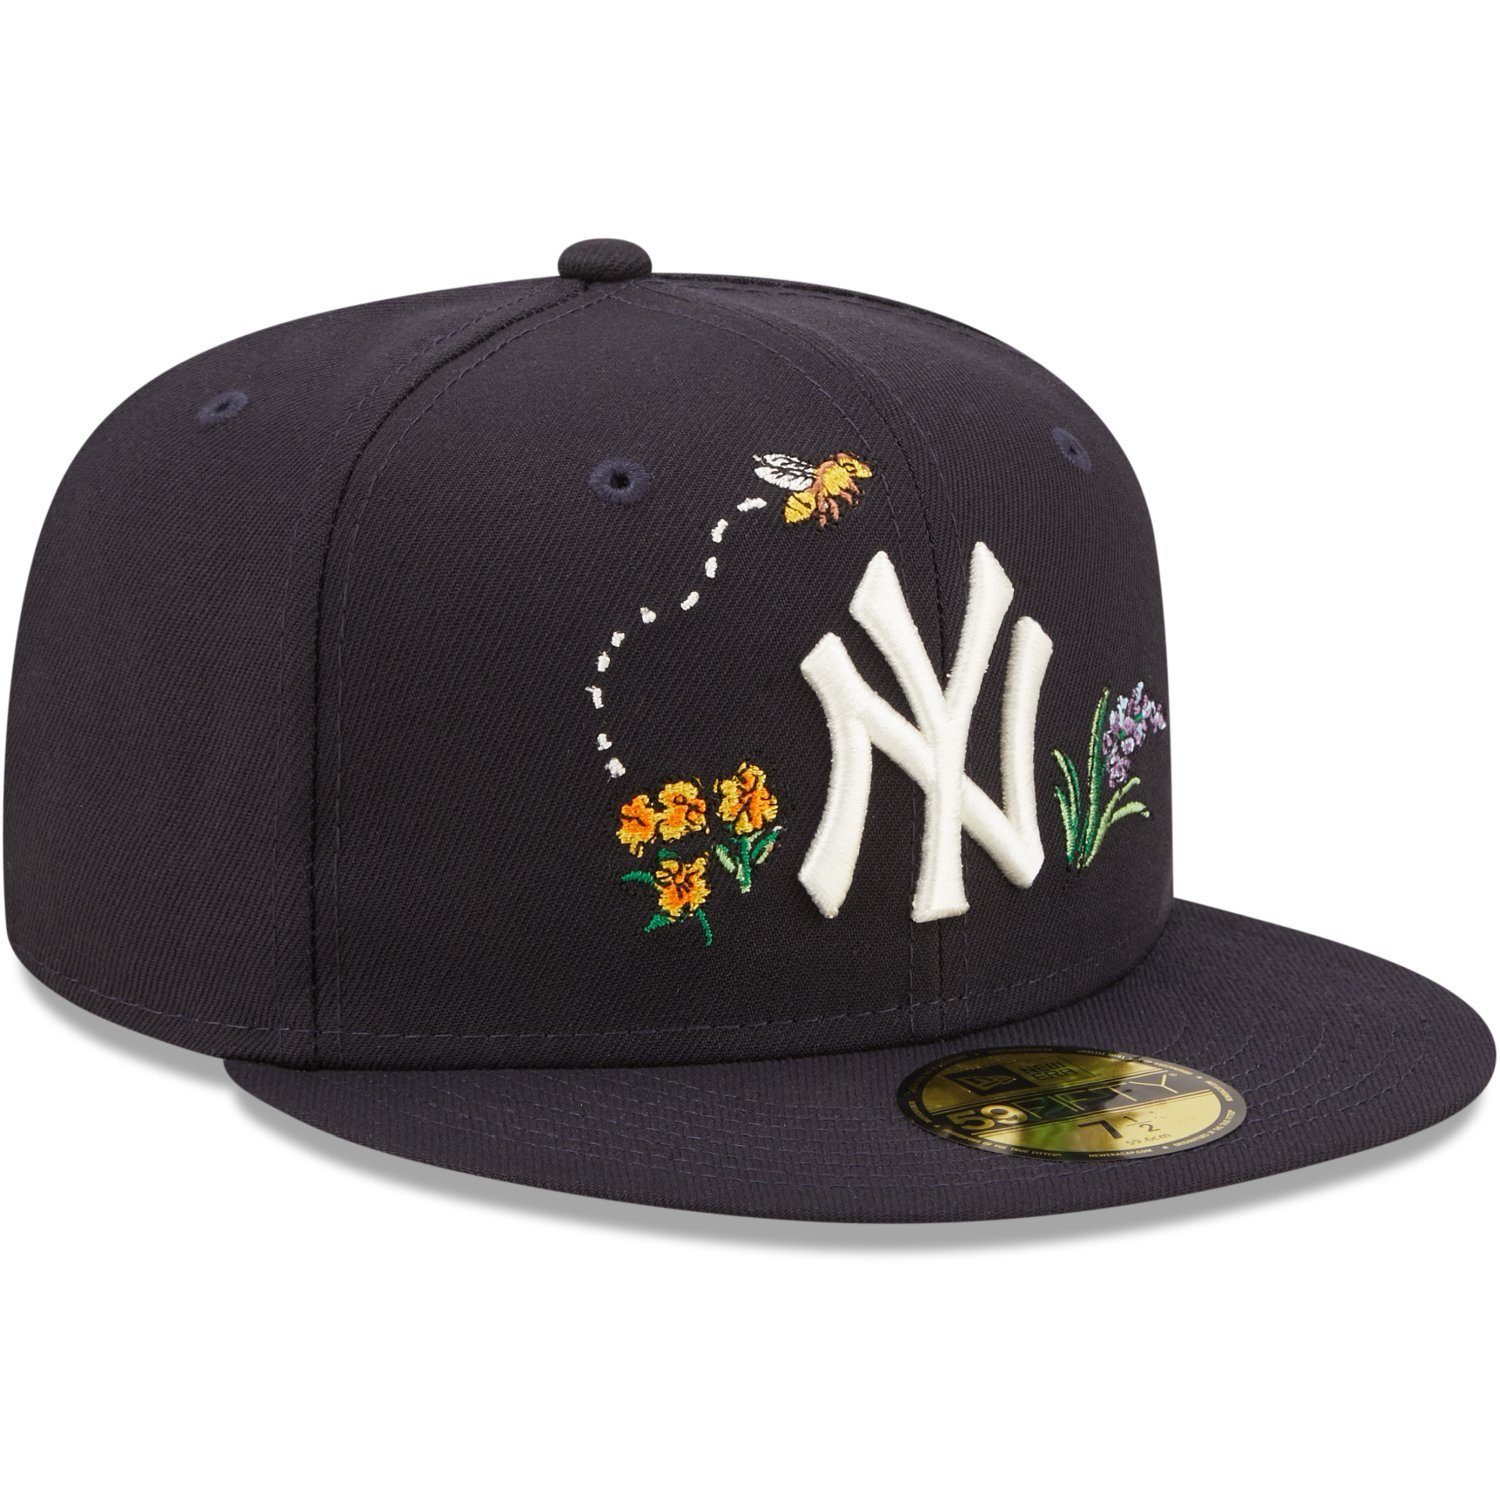 New 59Fifty FLORAL York WATER Yankees Fitted New Cap Era